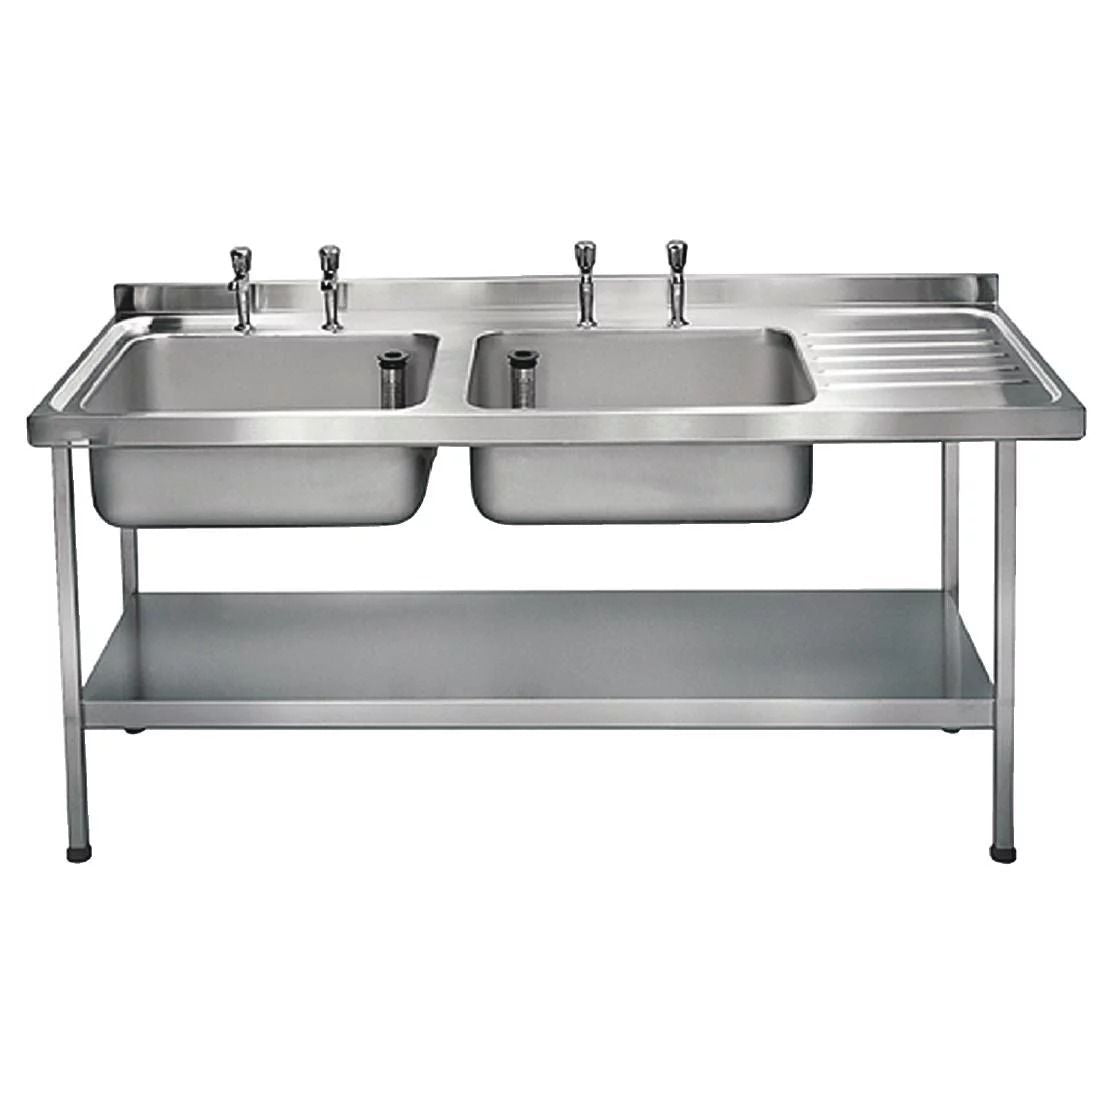 Franke Stainless Steel Double Bowl Sink Right Hand Drainer - P371